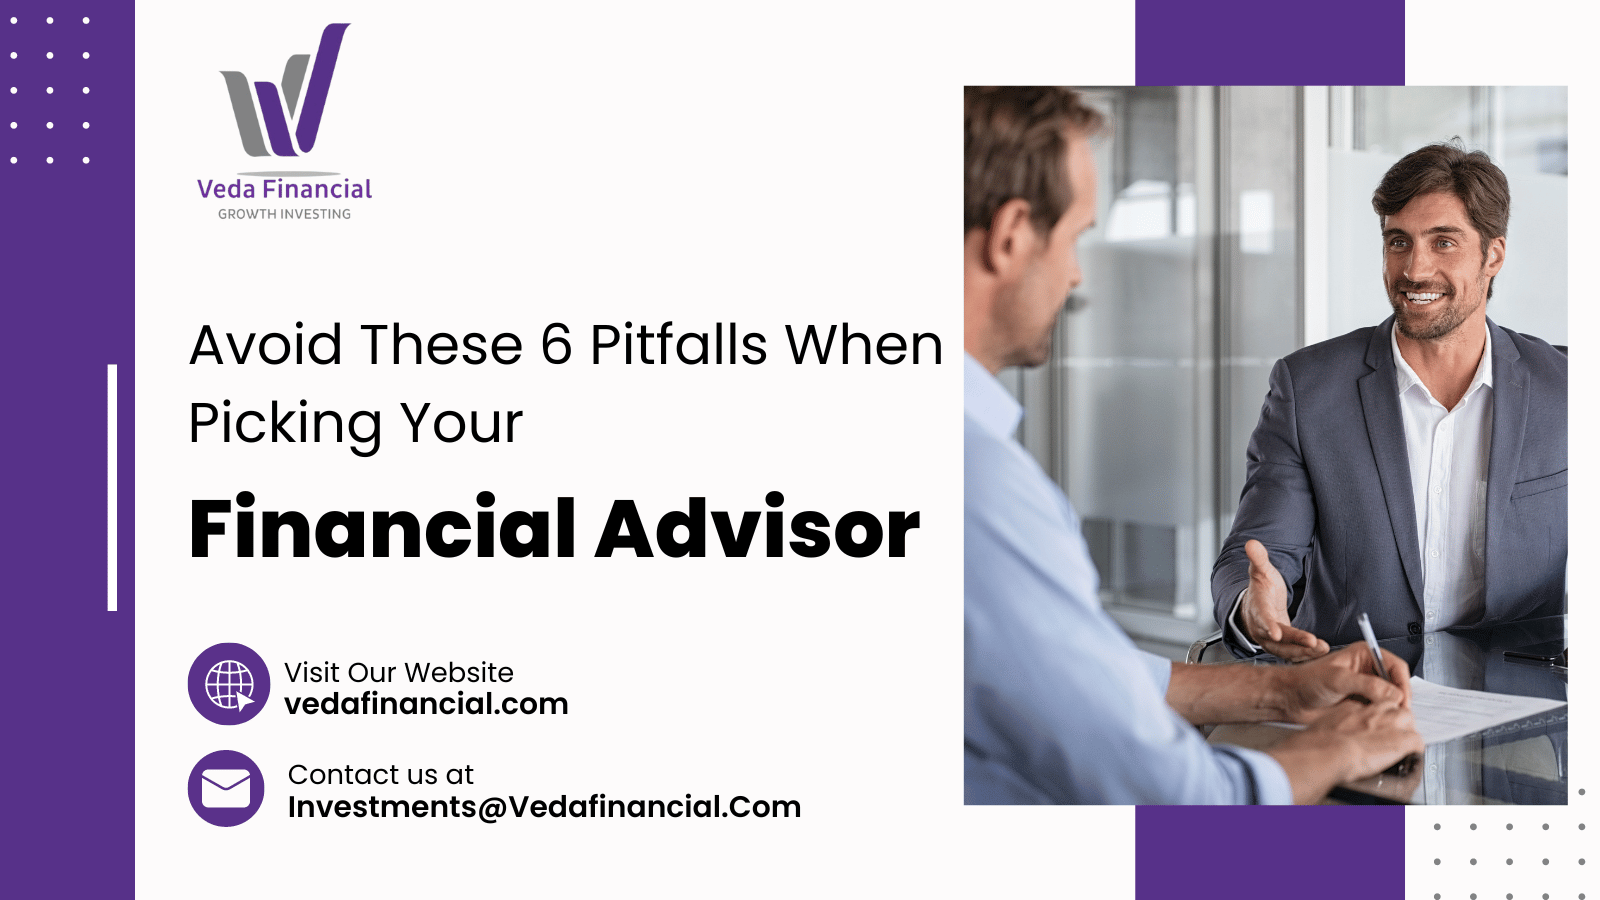 Avoid These 6 Pitfalls When Picking Your Financial Advisor